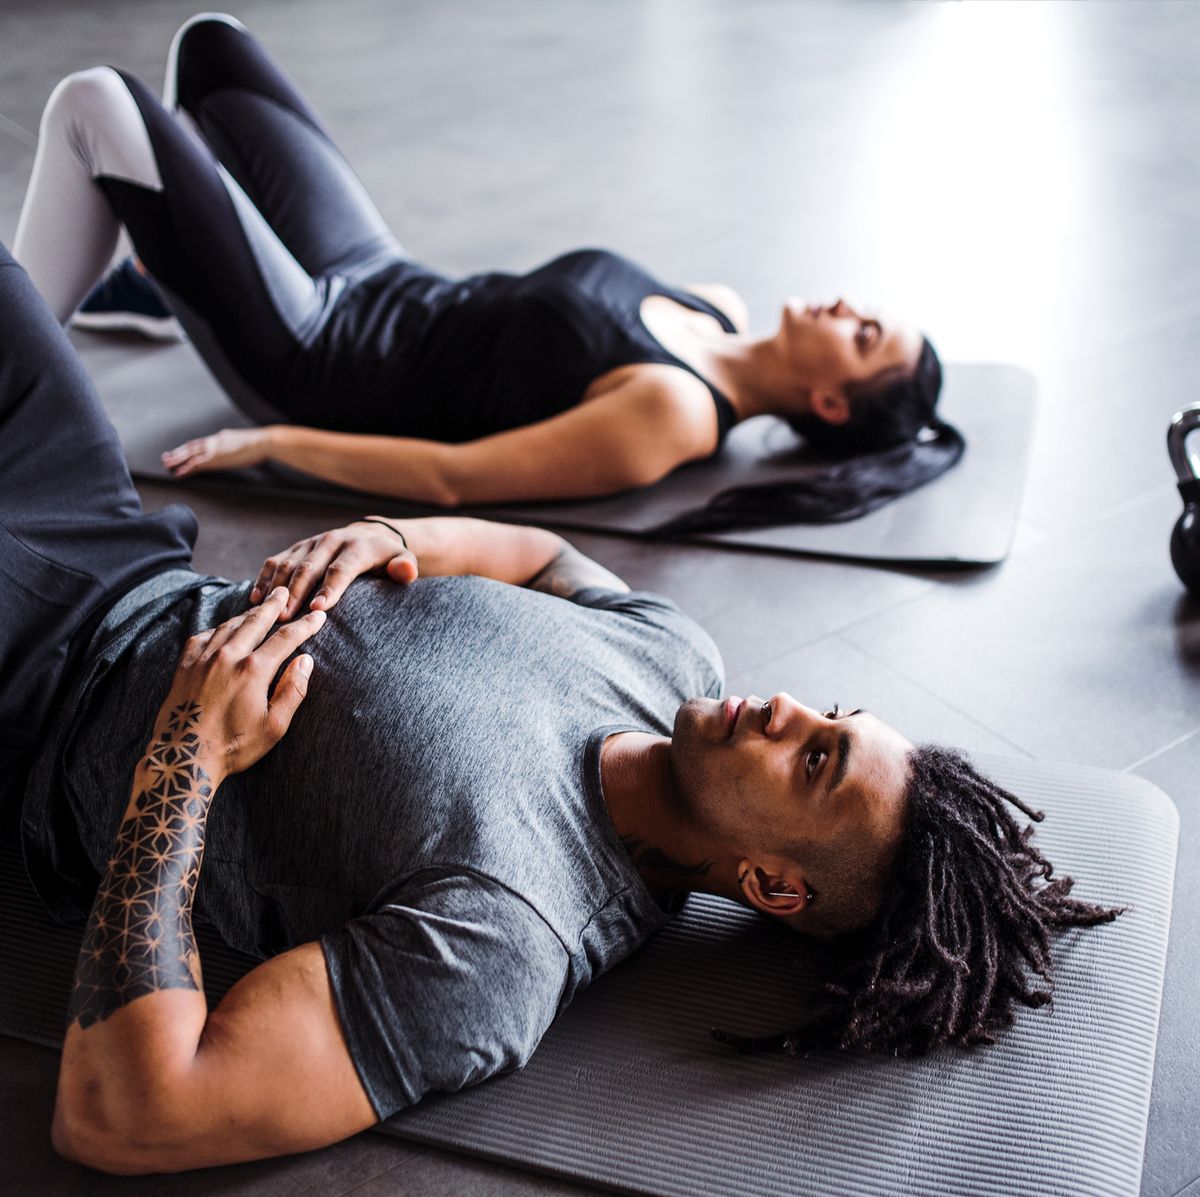 Downregulate Post-Workout to the Parasympathetic Nervous System